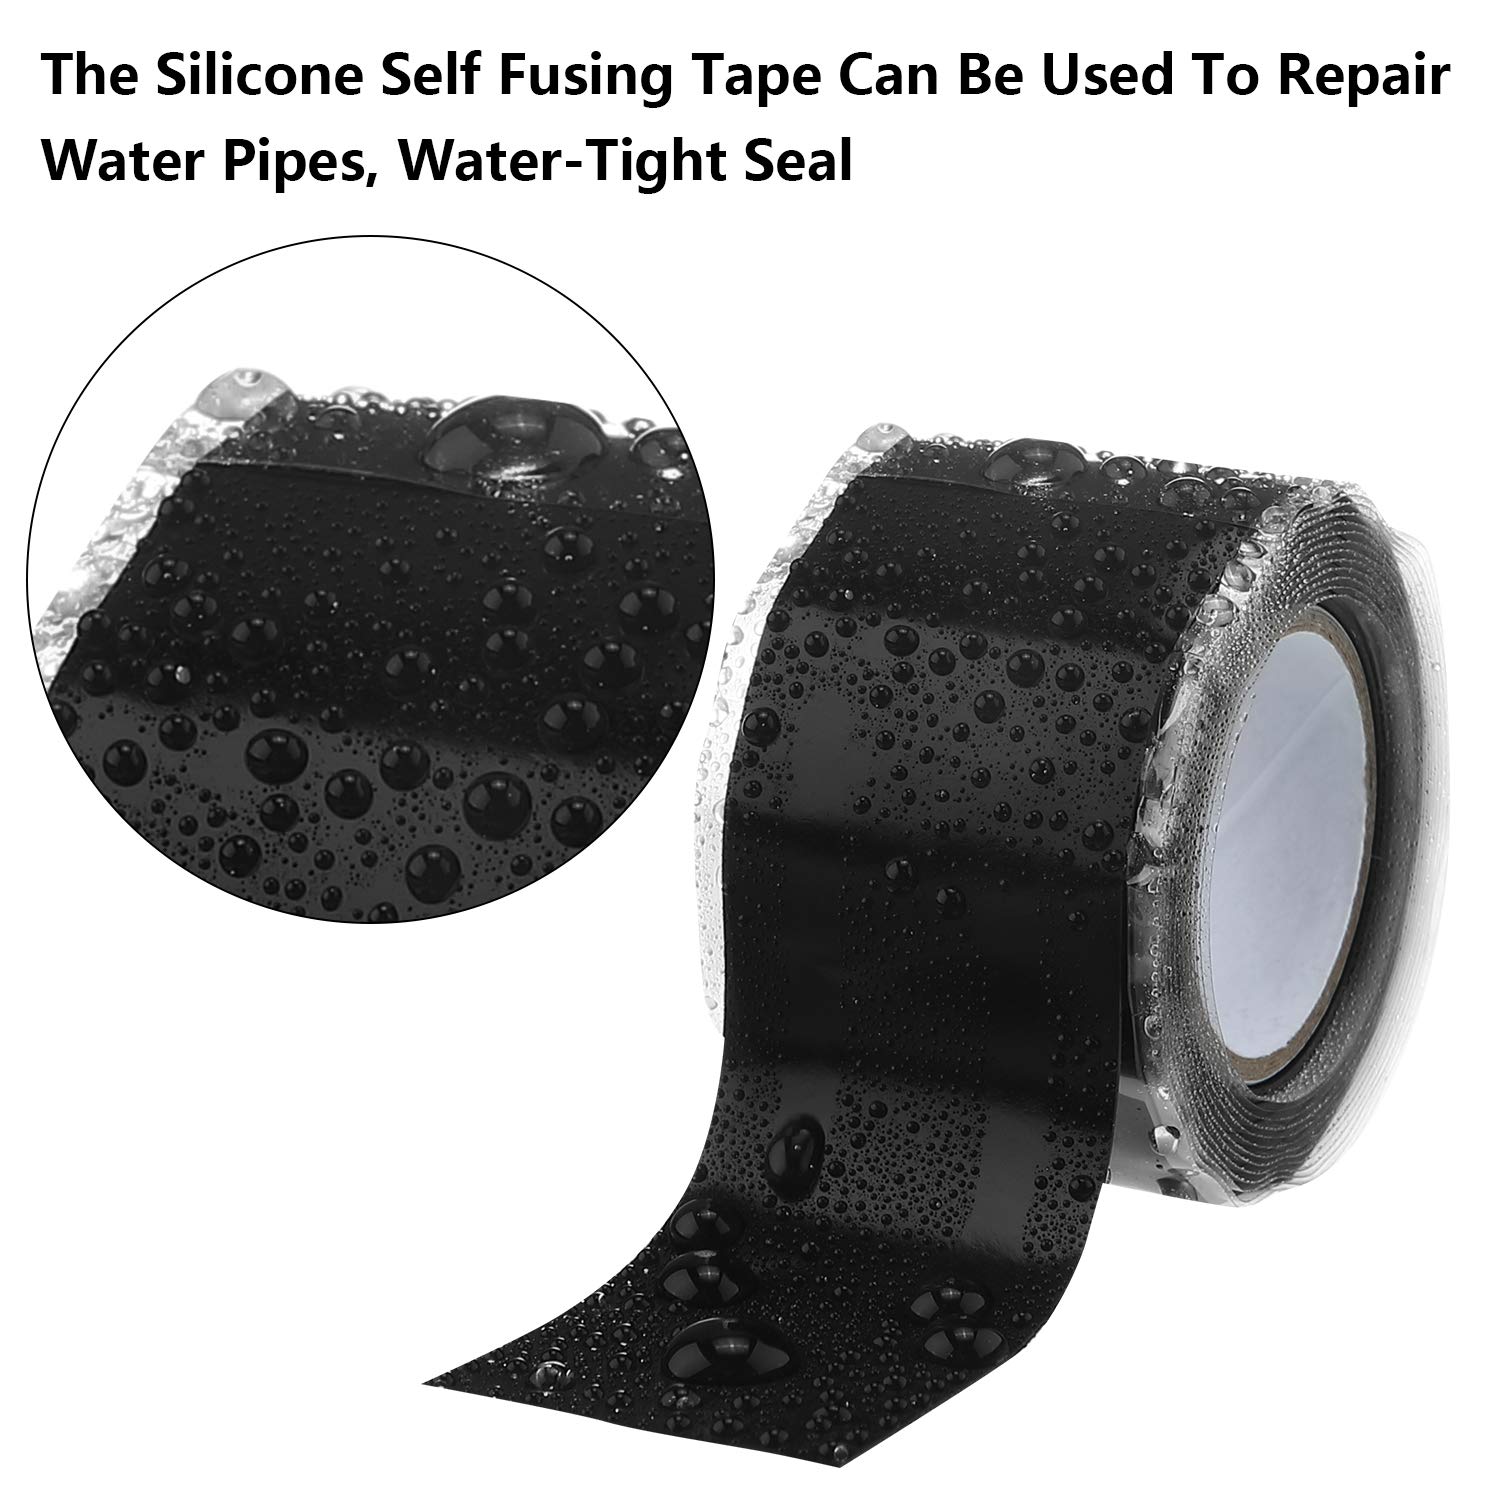 Self Fusing Silicone Tape Rubber Pipe Sealant Tape Sealing for Garden Plumbing and Hose Emergency Repair Waterproof  3.8cm * 3M ZopiStyle